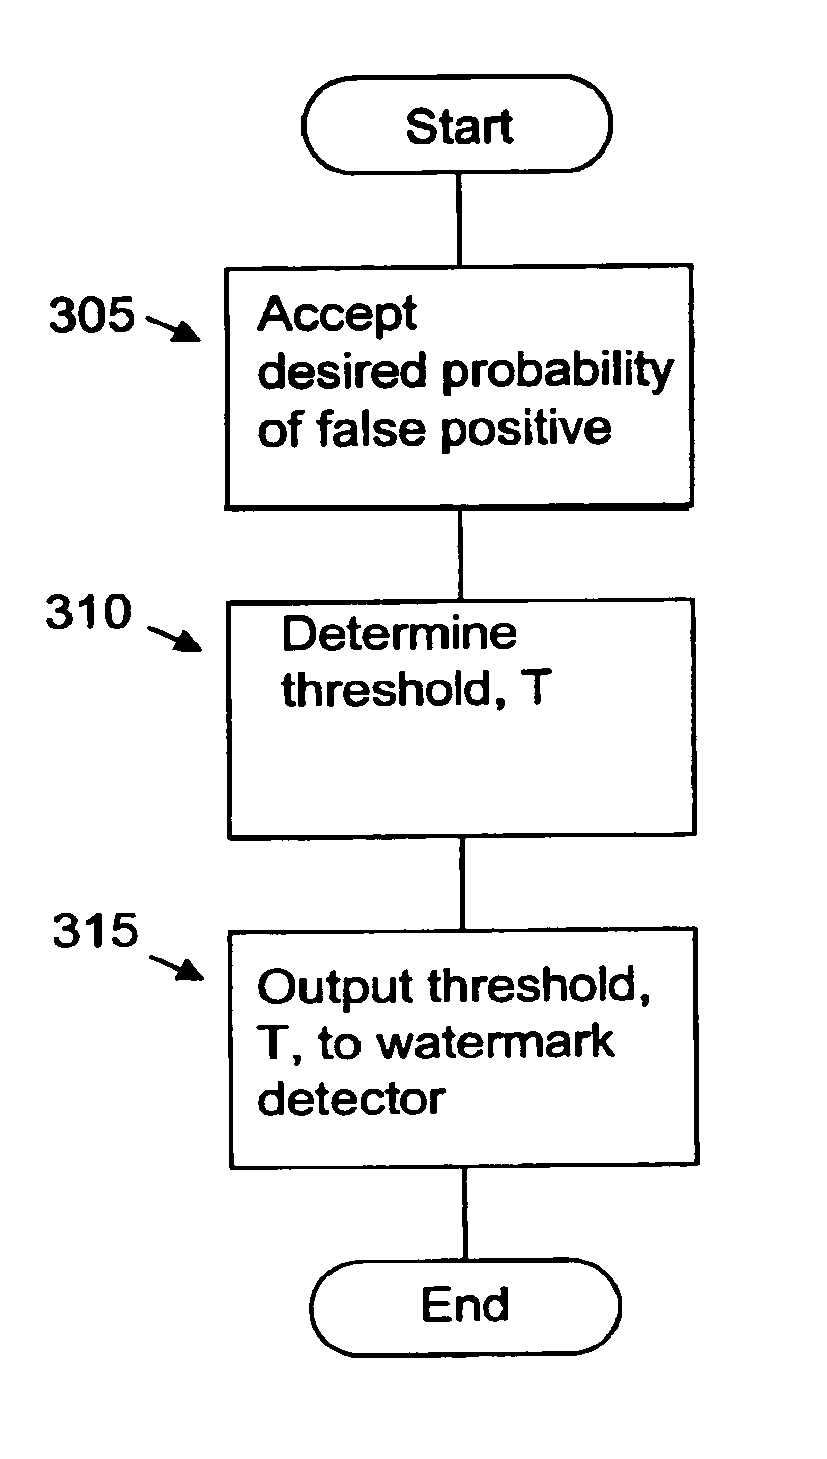 Method and apparatus for setting a detection threshold given a desired false probability